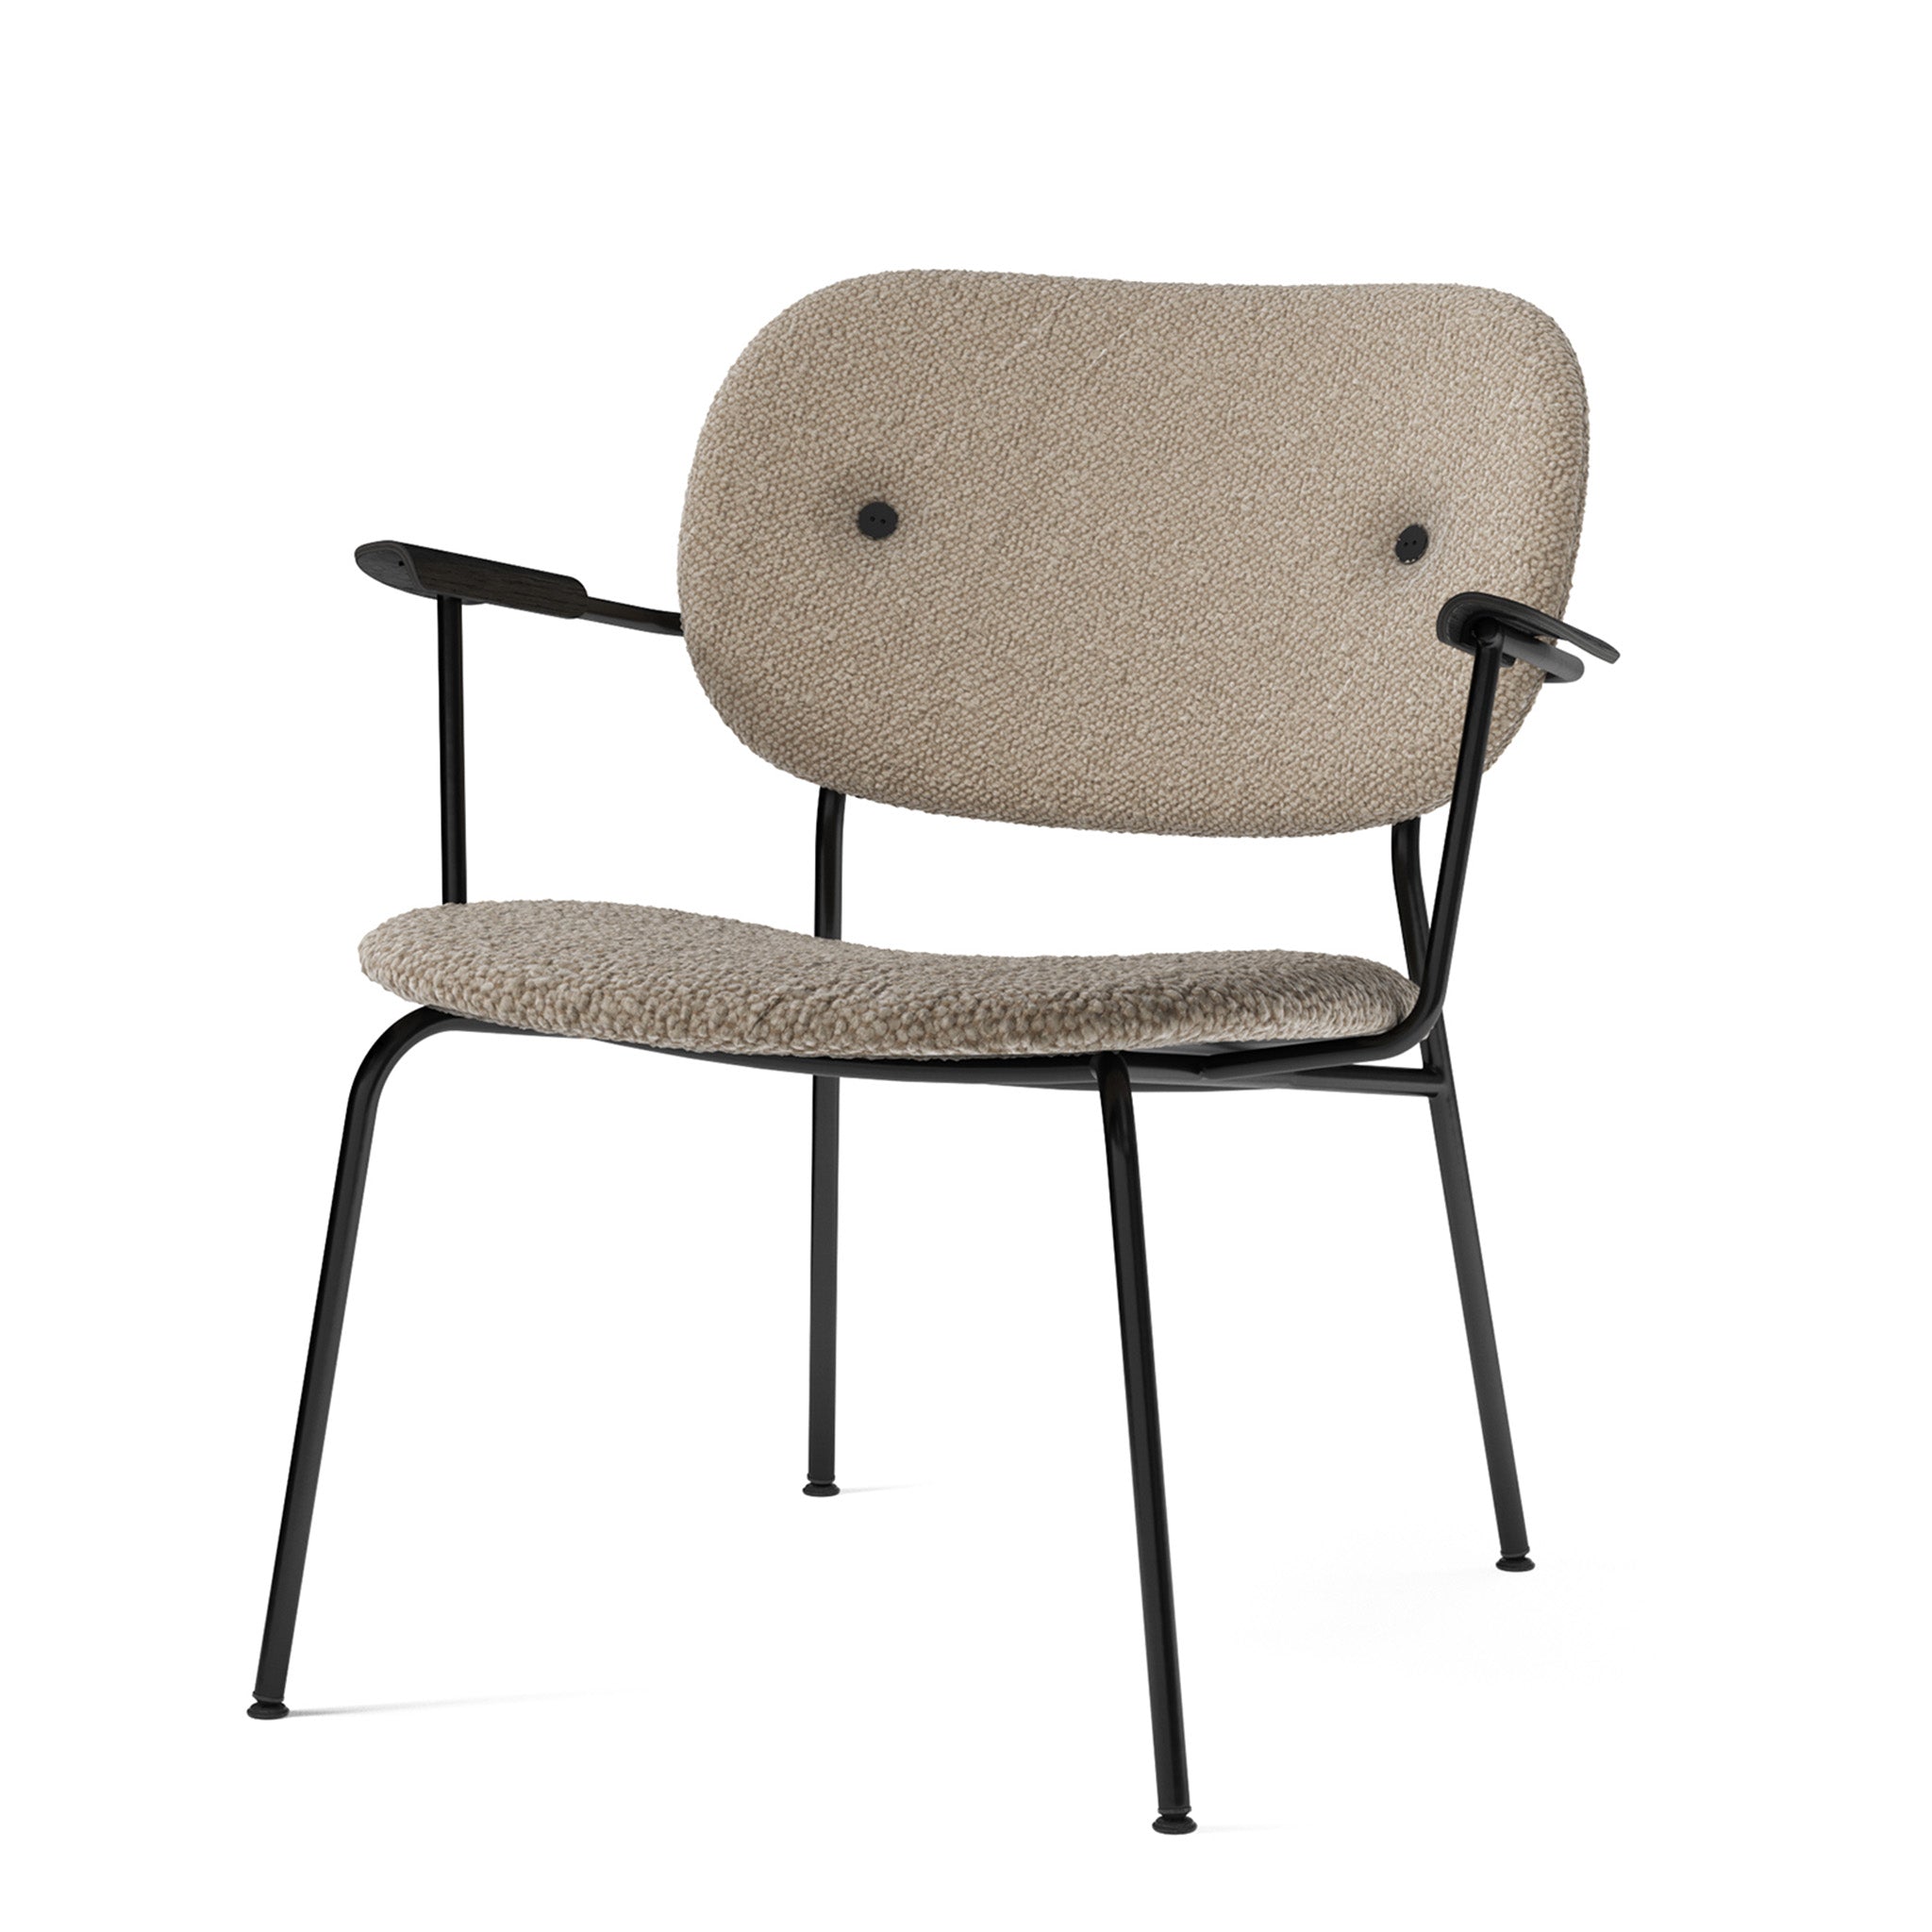 Co Lounge Chair by Norm Architects & Els Van Hoorebeeck